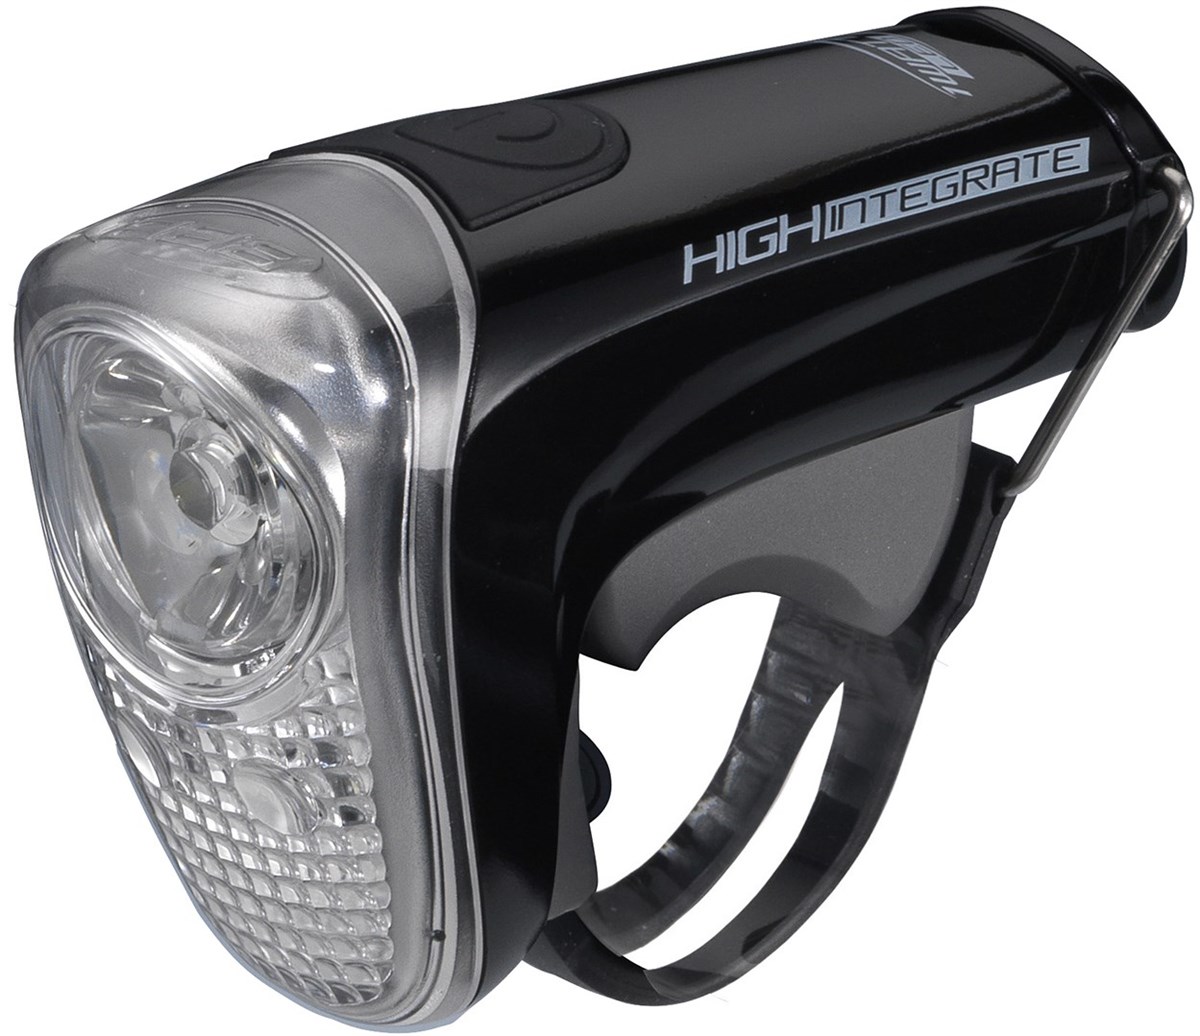 BBB BLS-43 - HighIntegrate Front Light product image